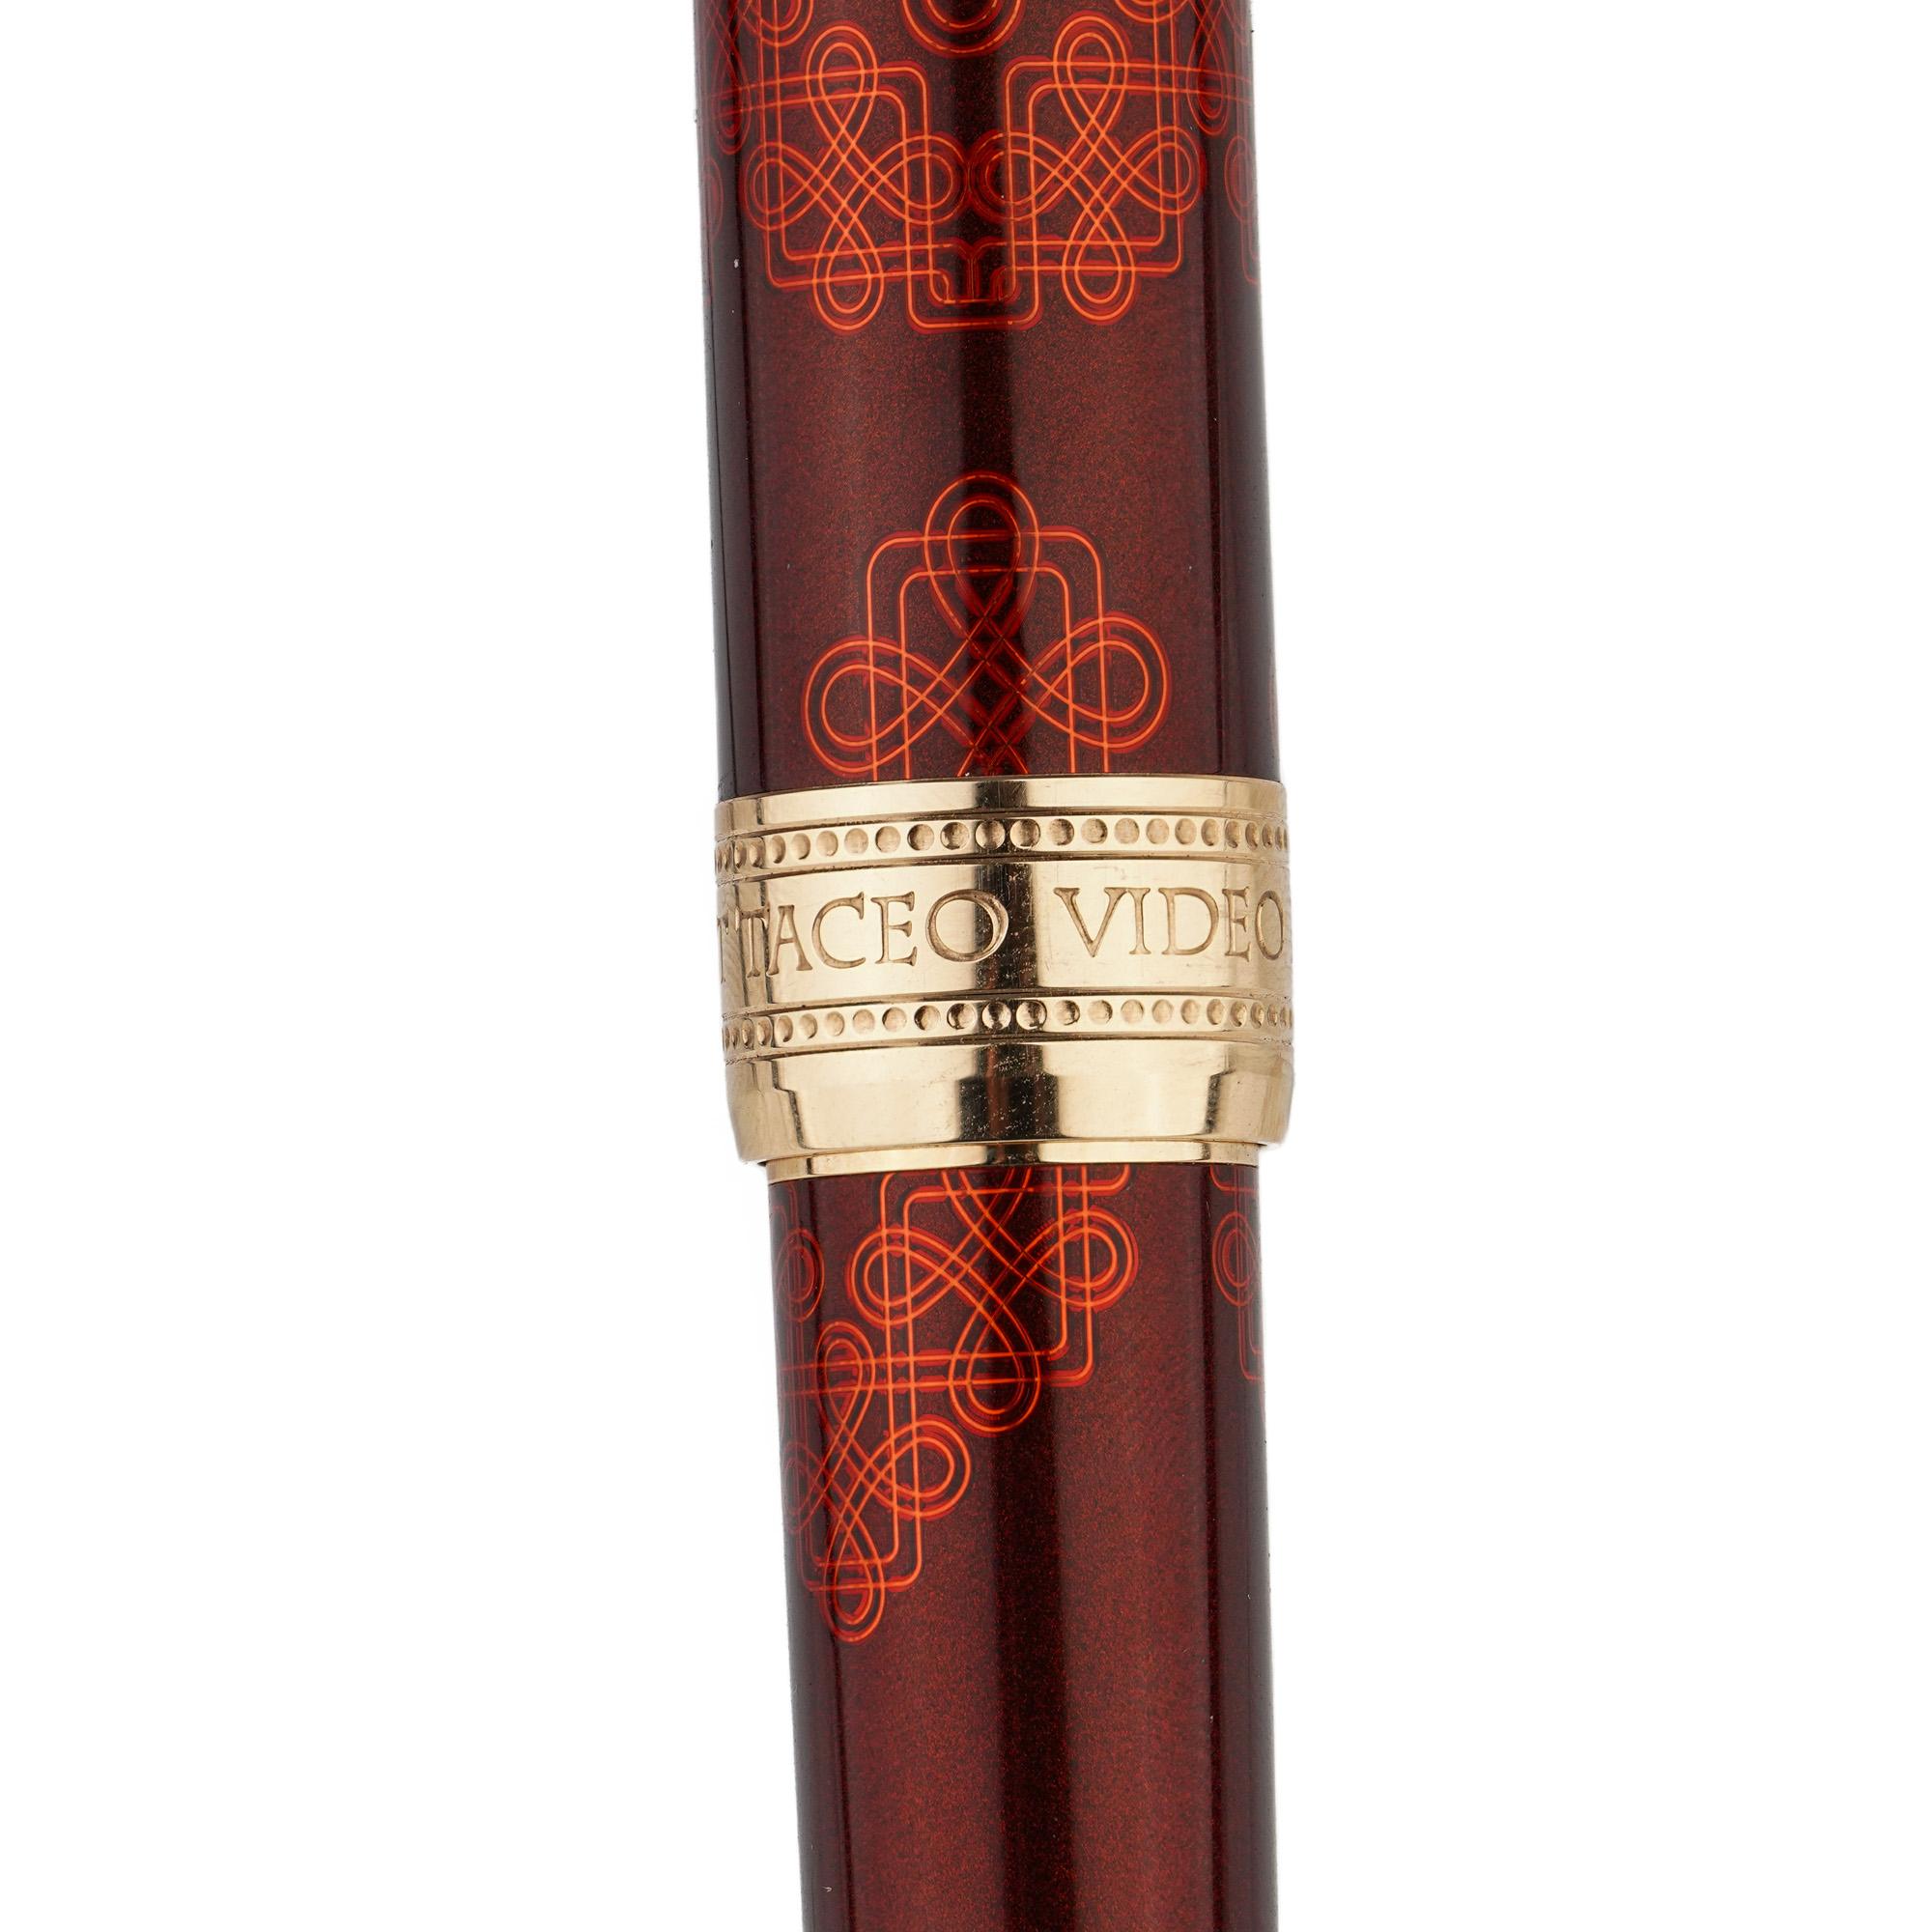 Montblanc Elizabeth I Patron of Art Series Limited Edition 612/888 Fountain Pen For Sale 2